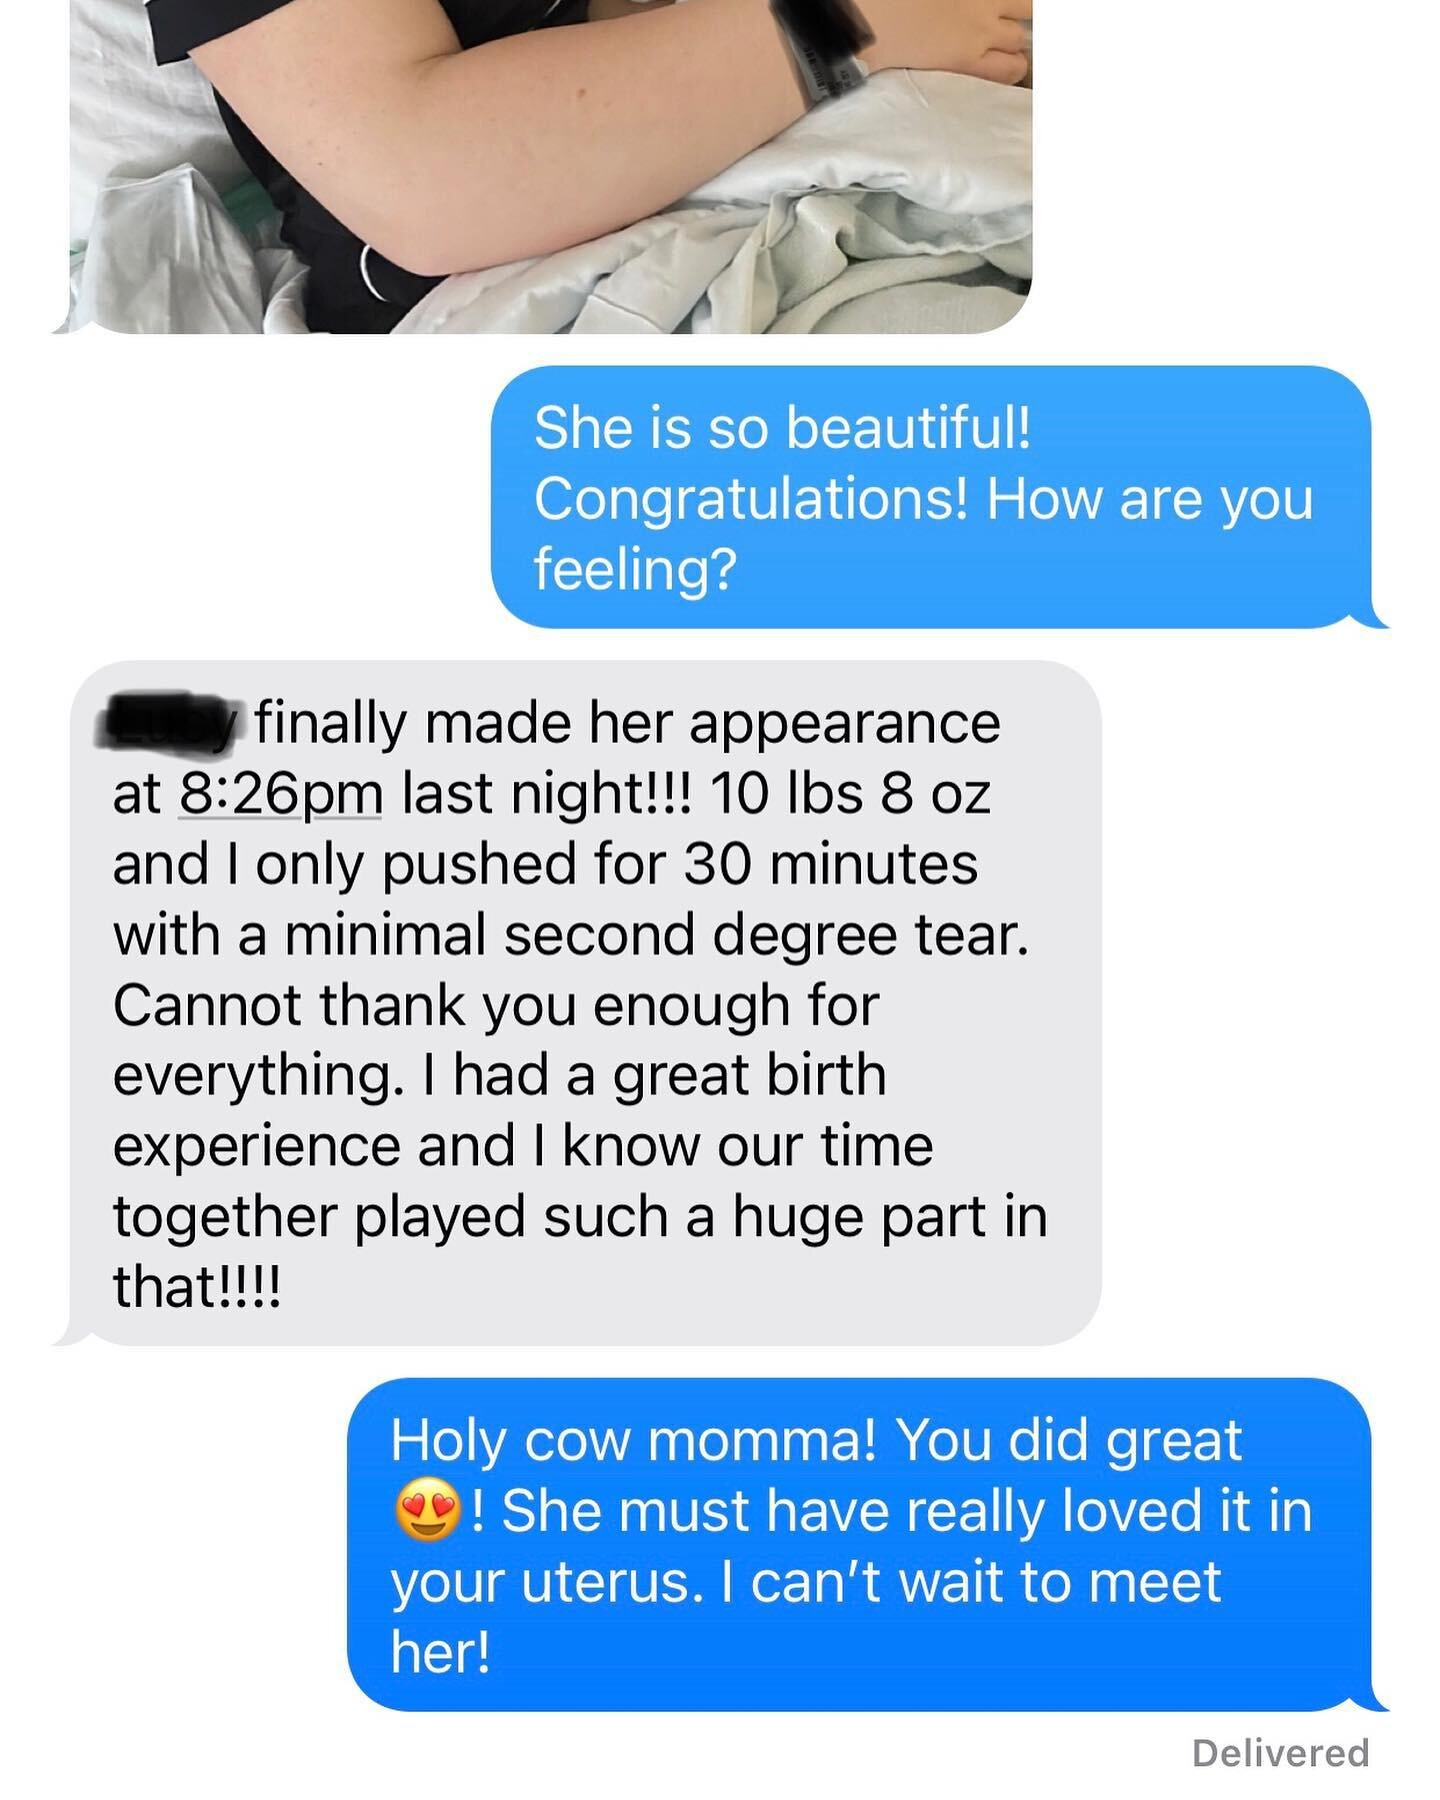 The best kind of texts to receive from clients are baby announcements! 😍
 
I ❤️working with clients during their pregnancies. Prenatal pelvic floor therapy can reduce labor time, reduce need for medical interventions and hasten postpartum recovery. 